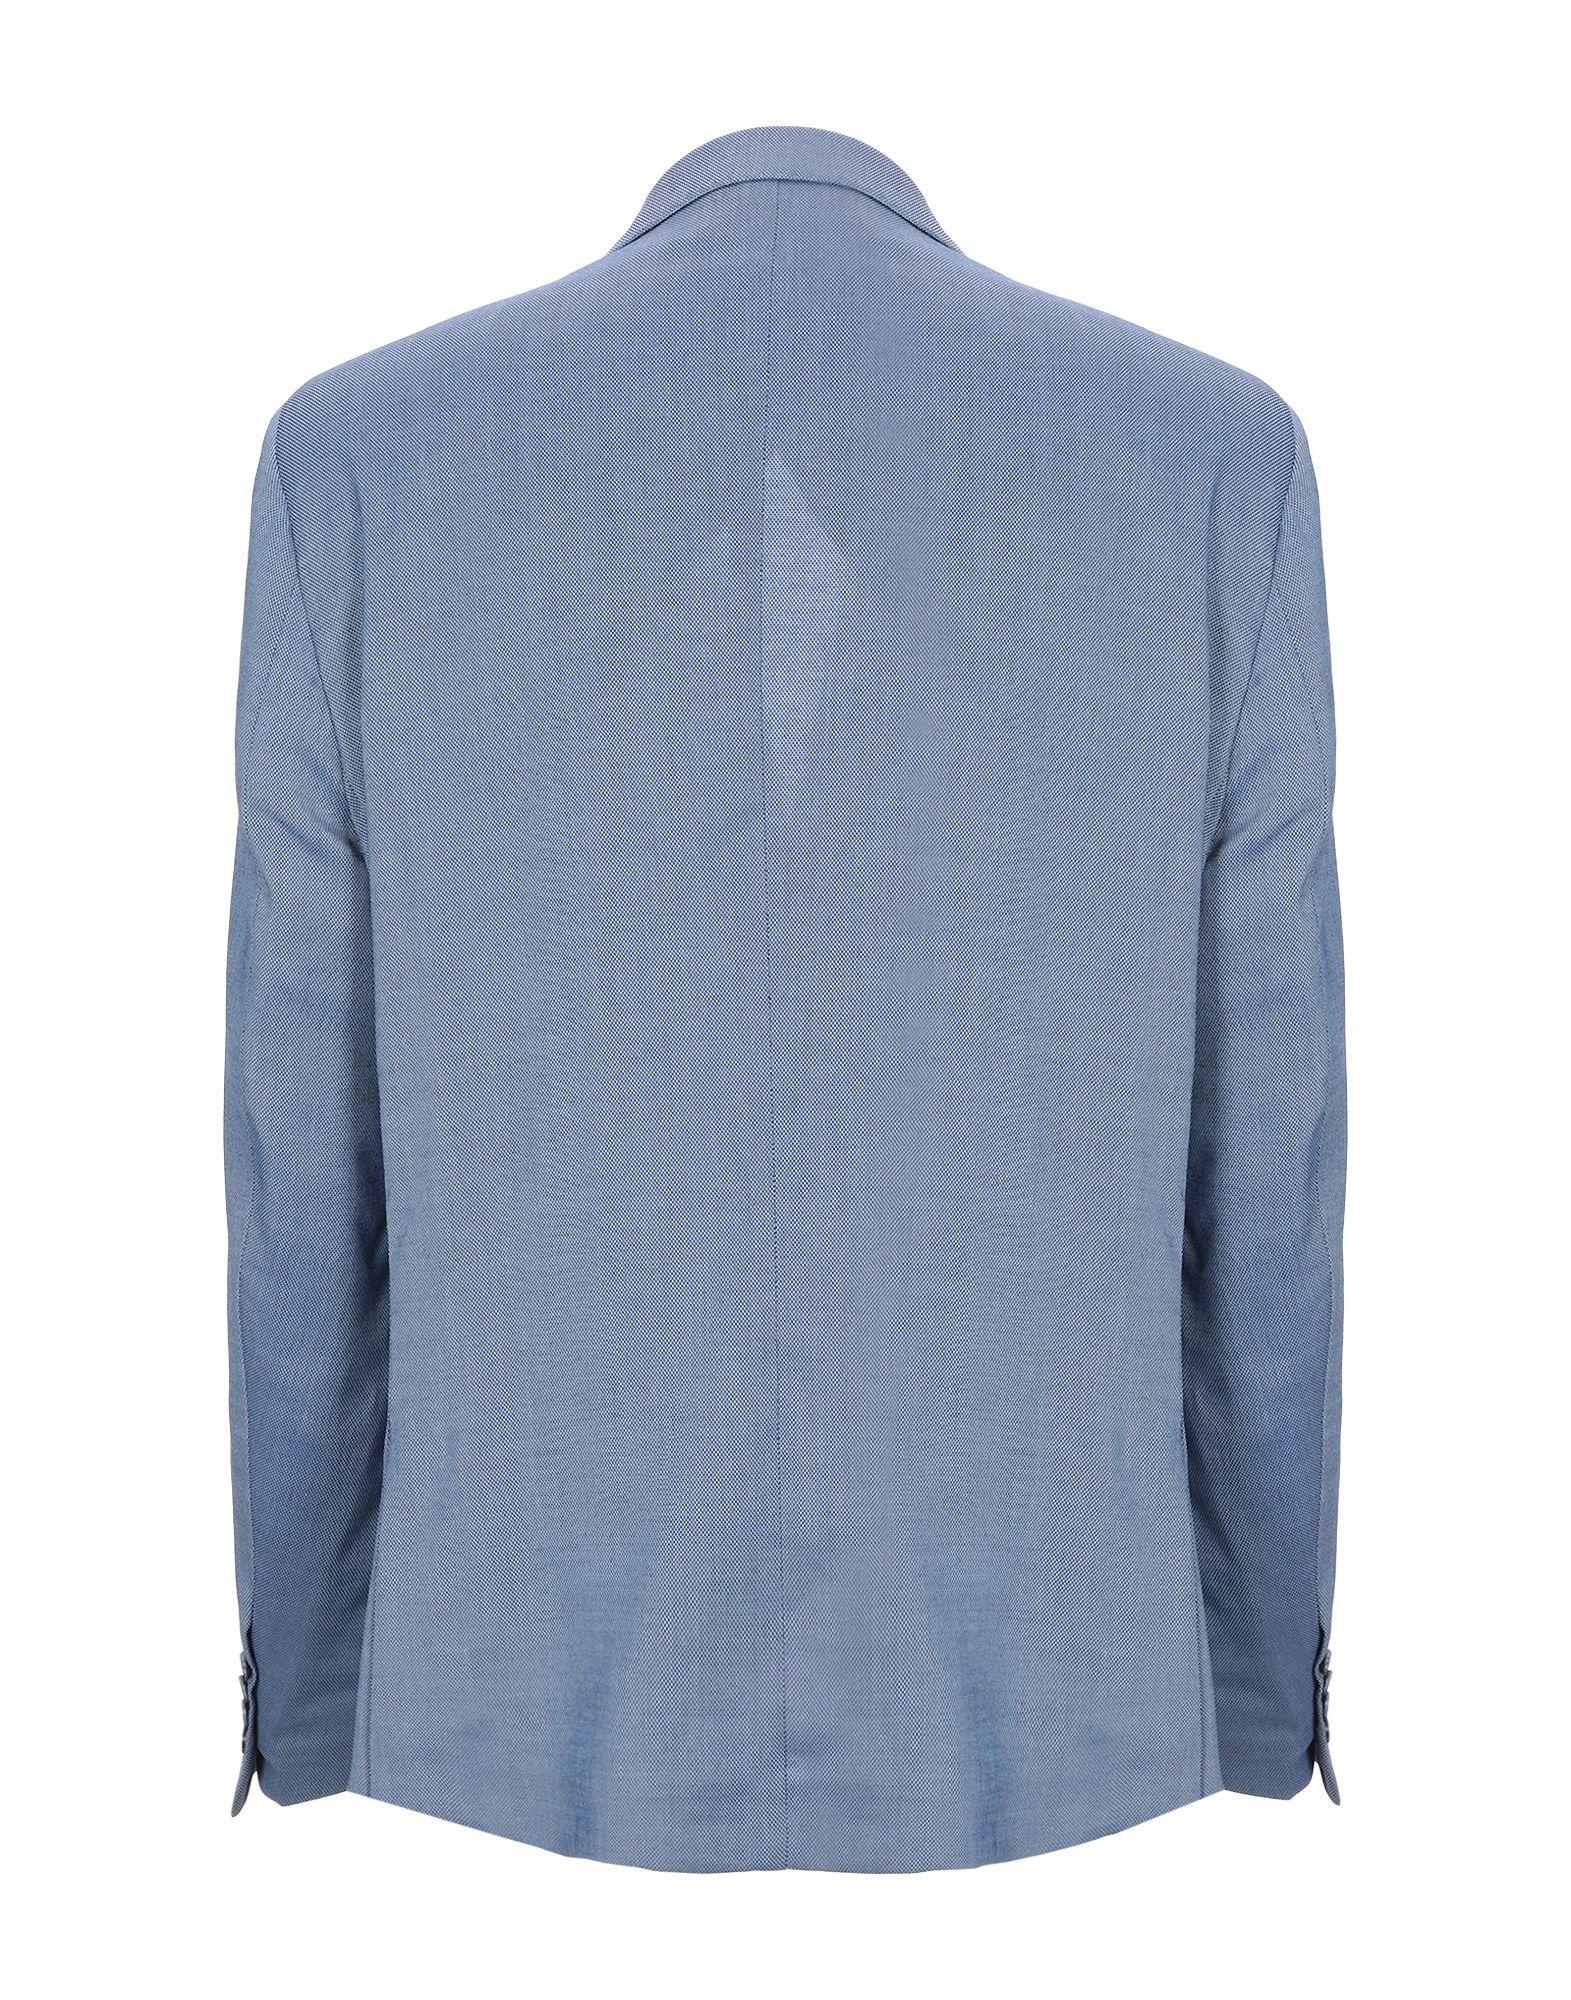 Guess Synthetic Blazer in Pastel Blue (Blue) for Men - Lyst